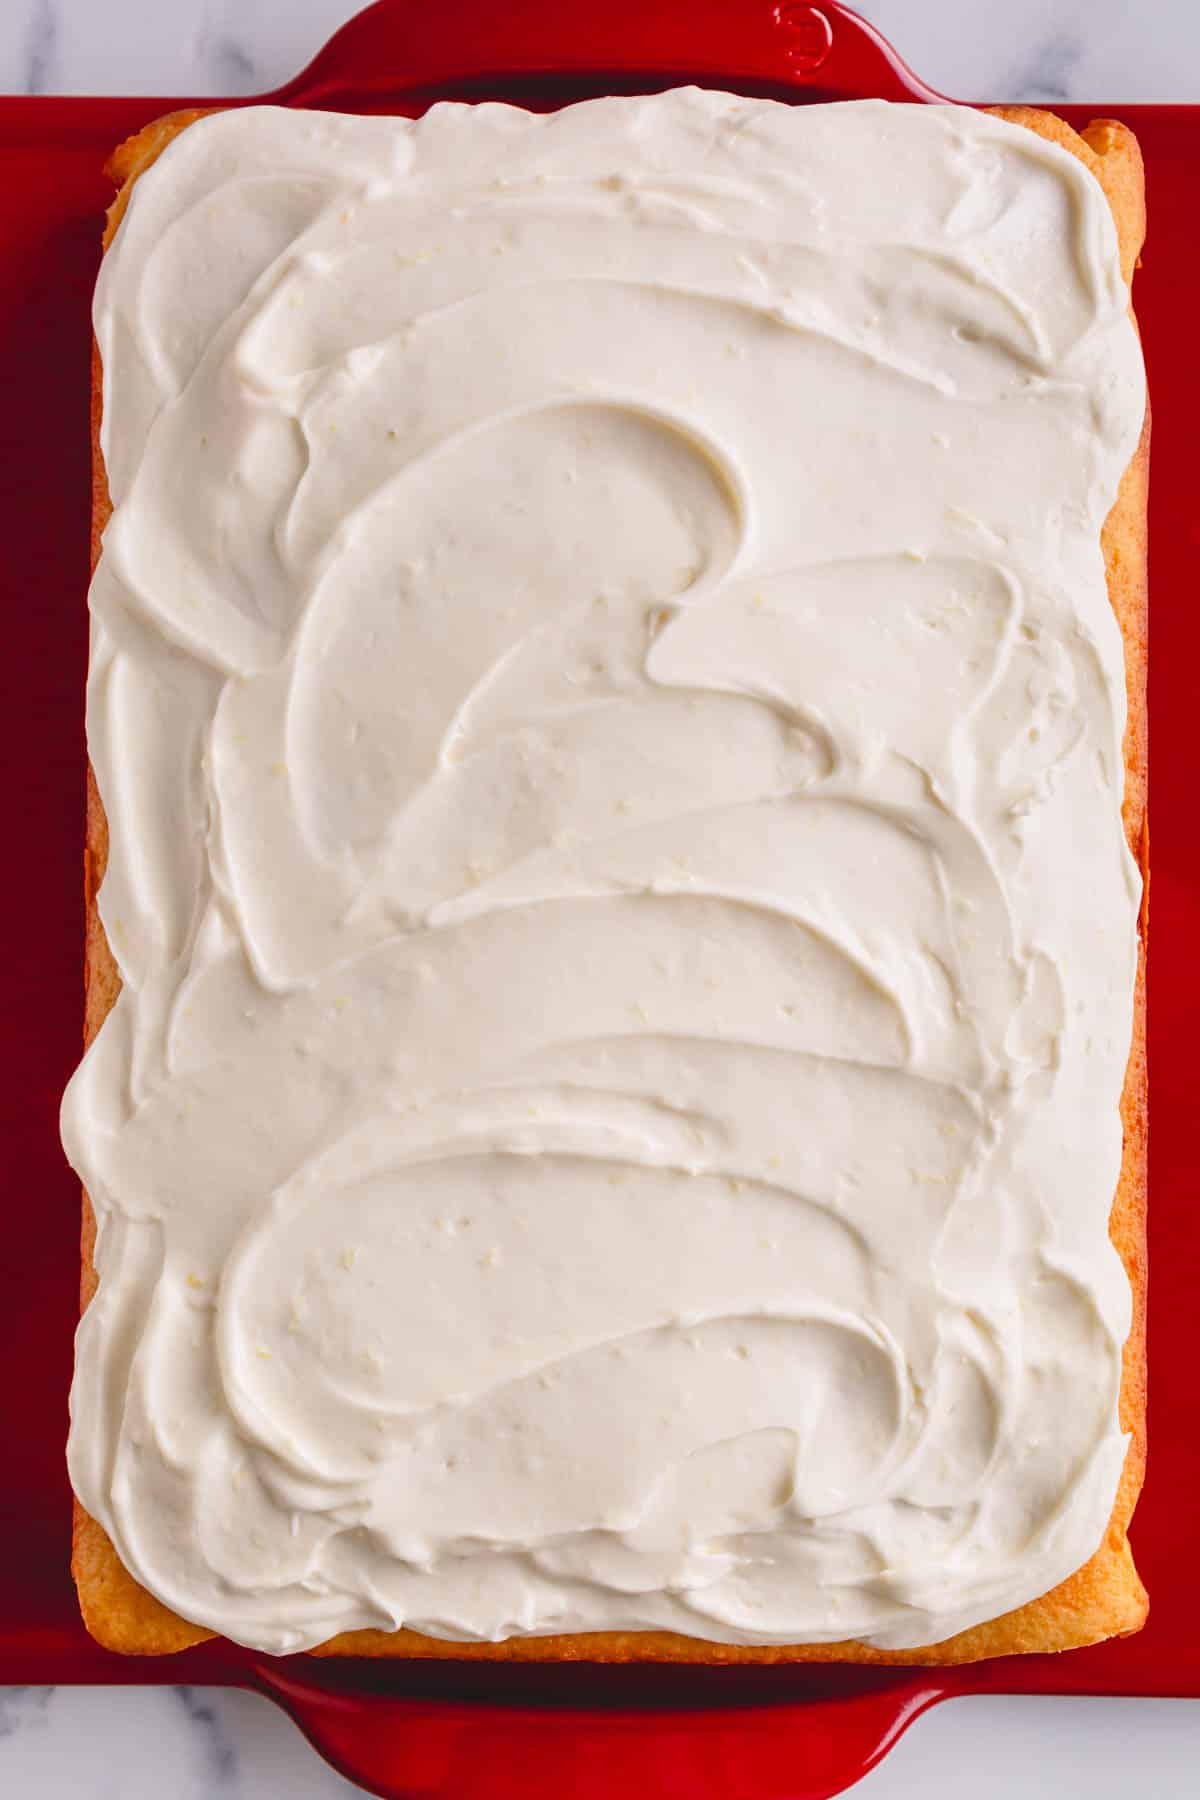 A yellow cake topped with lemon cream cheese frosting.